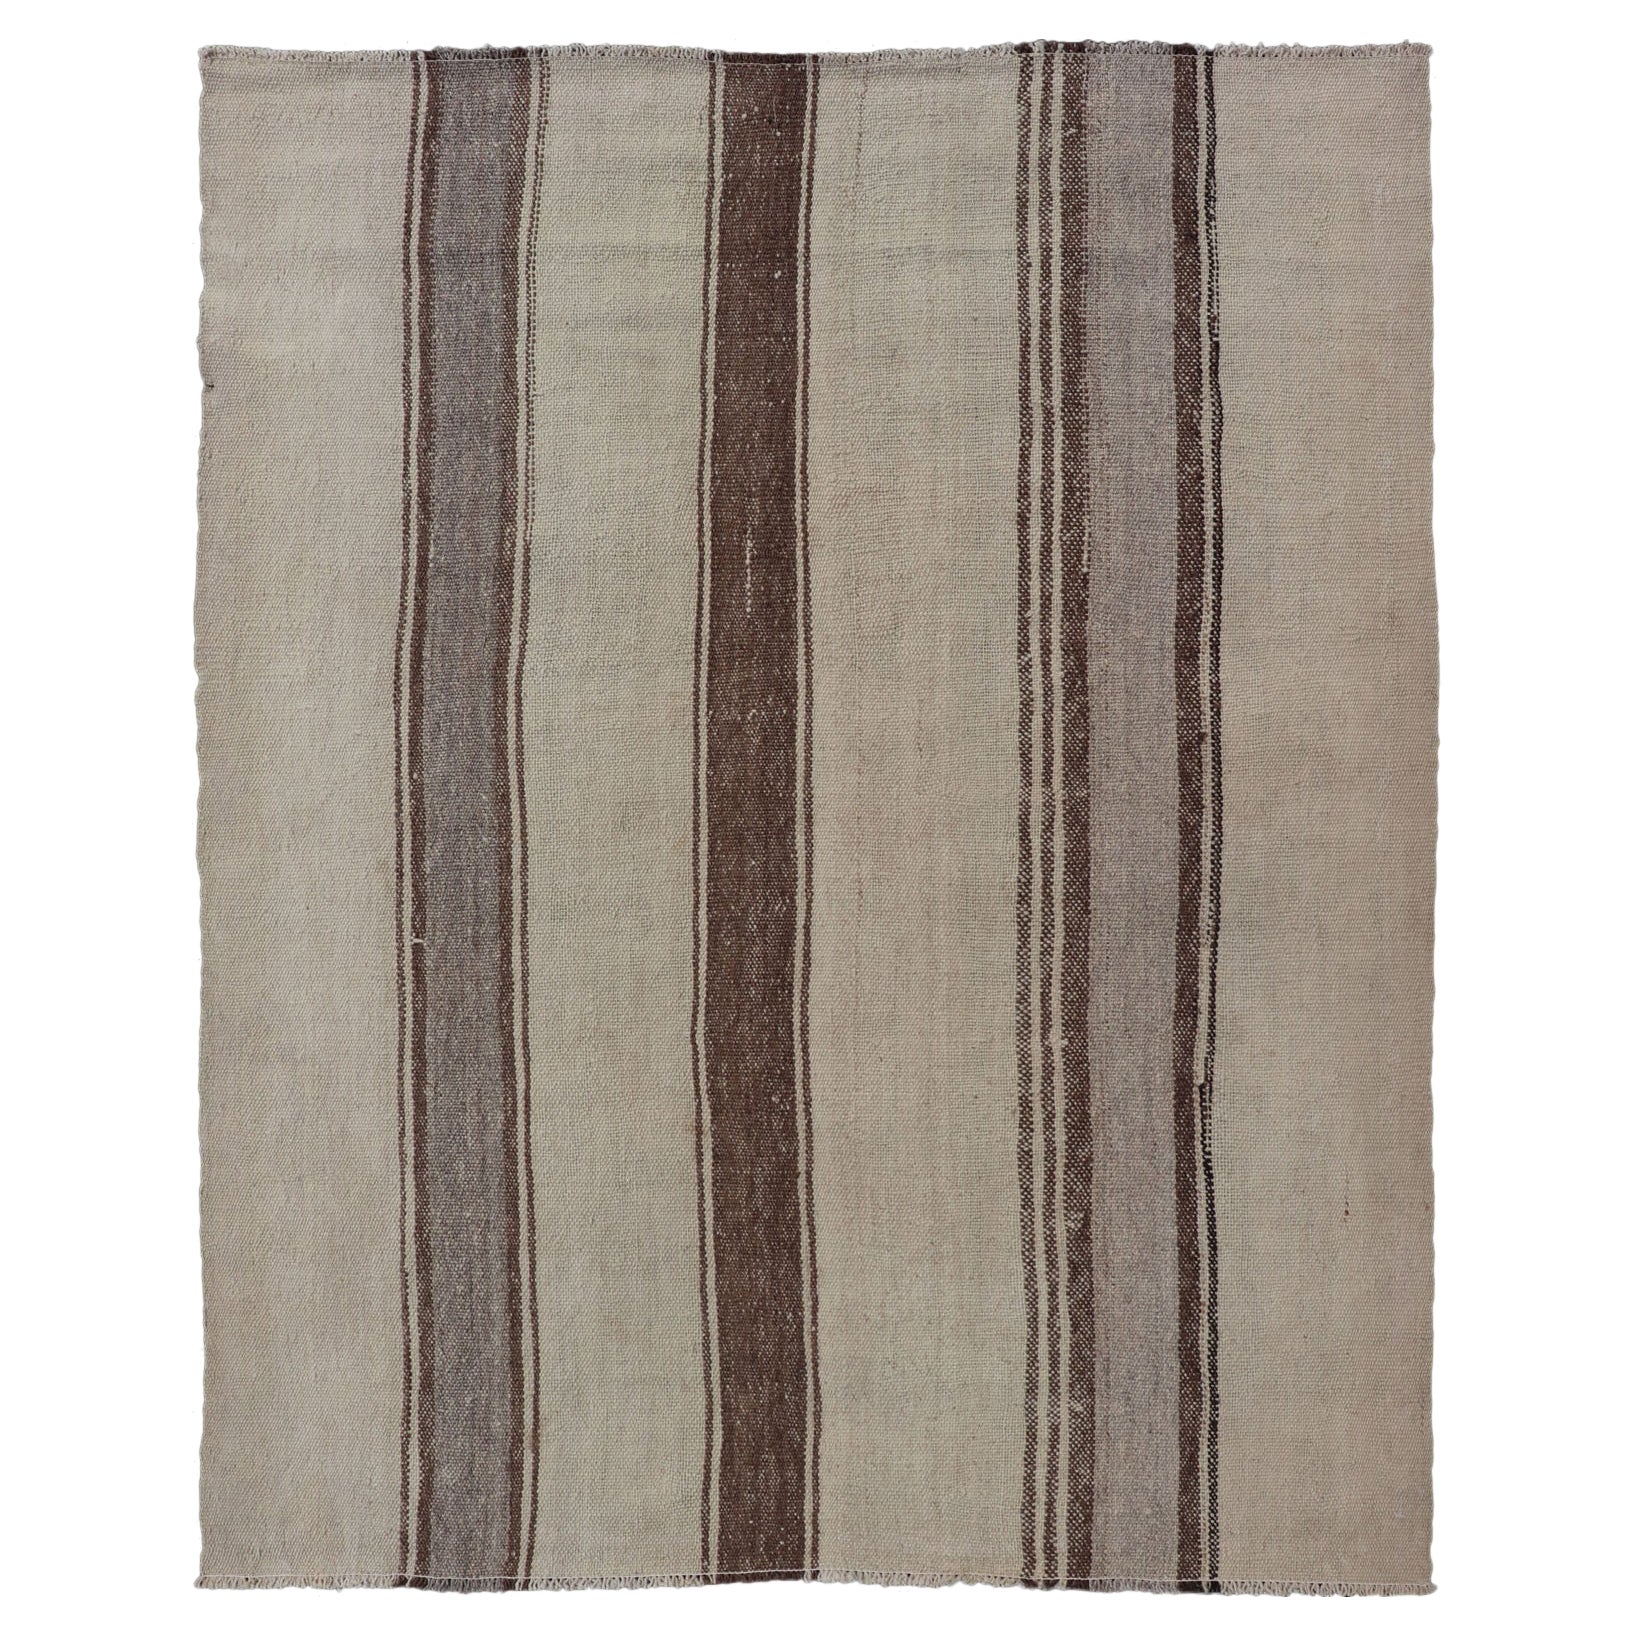 Vintage Turkish Kilim with Stripes in Tan, Gray, Taupe, Cream & Brown